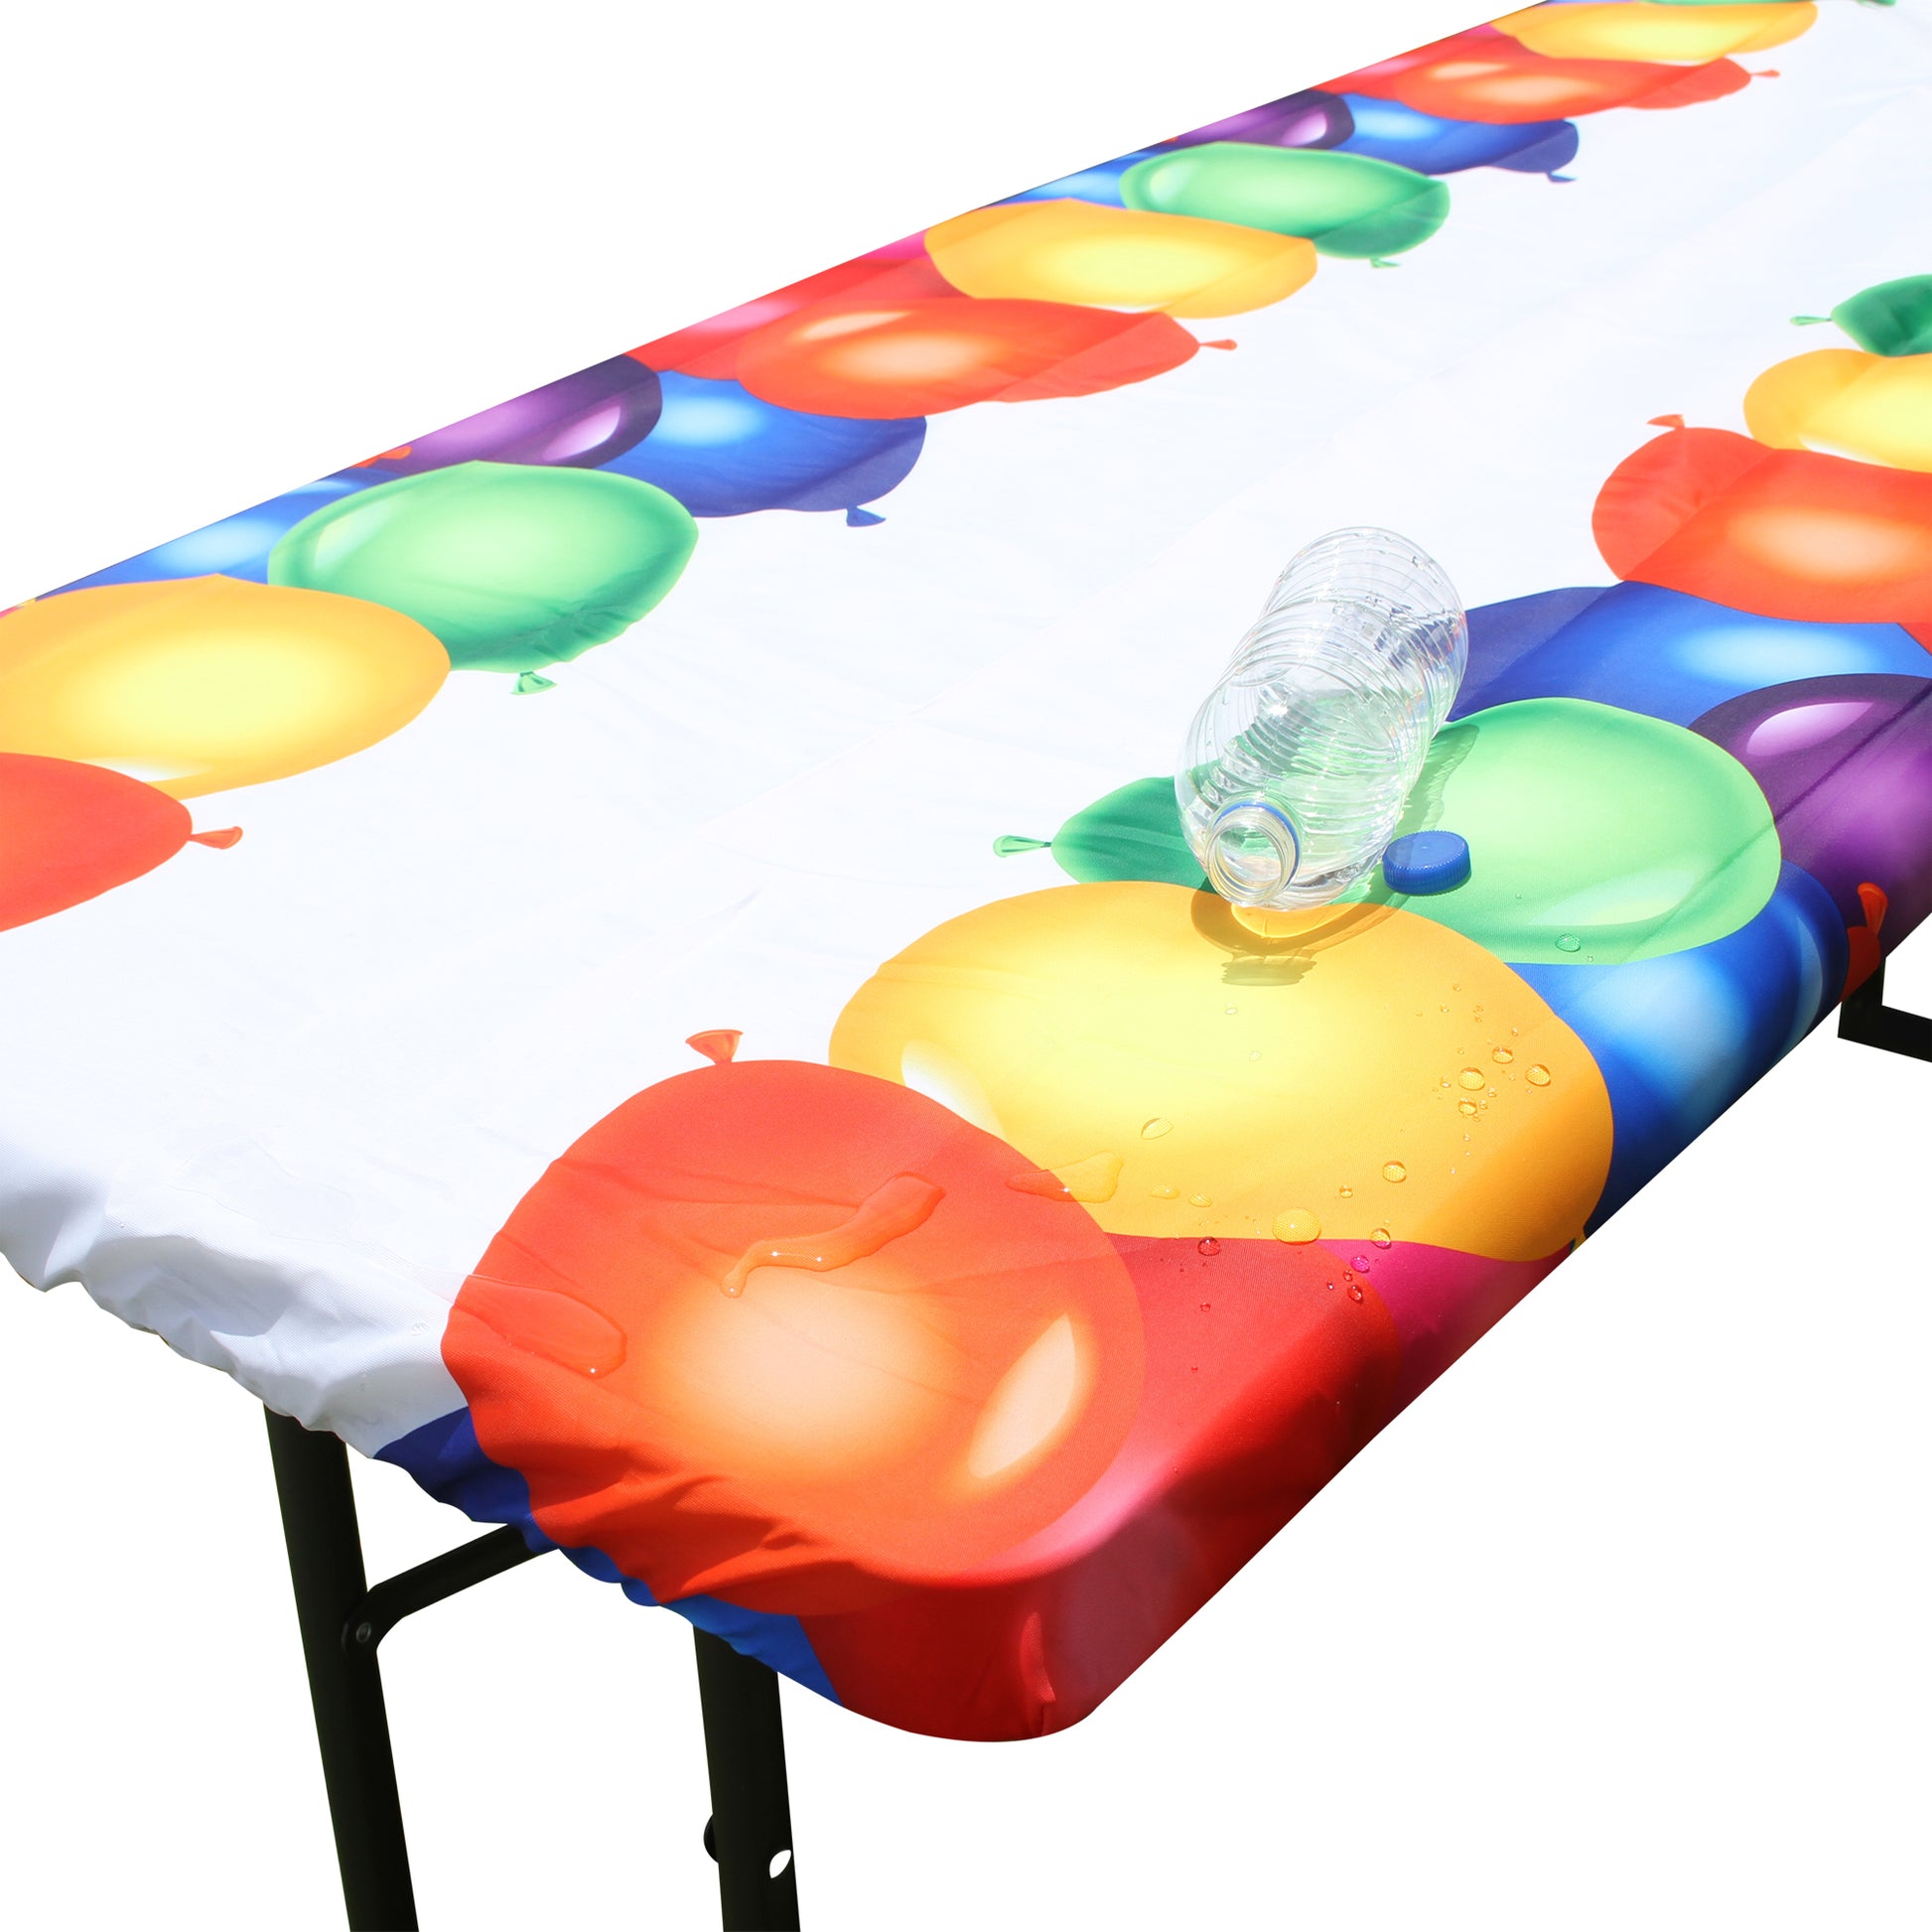 TableCloth PLUS 72" Balloons Fitted PEVA Vinyl Tablecloth for 6' Folding Tables is easy to clean, water proof, easy to install, and has an elastic rim